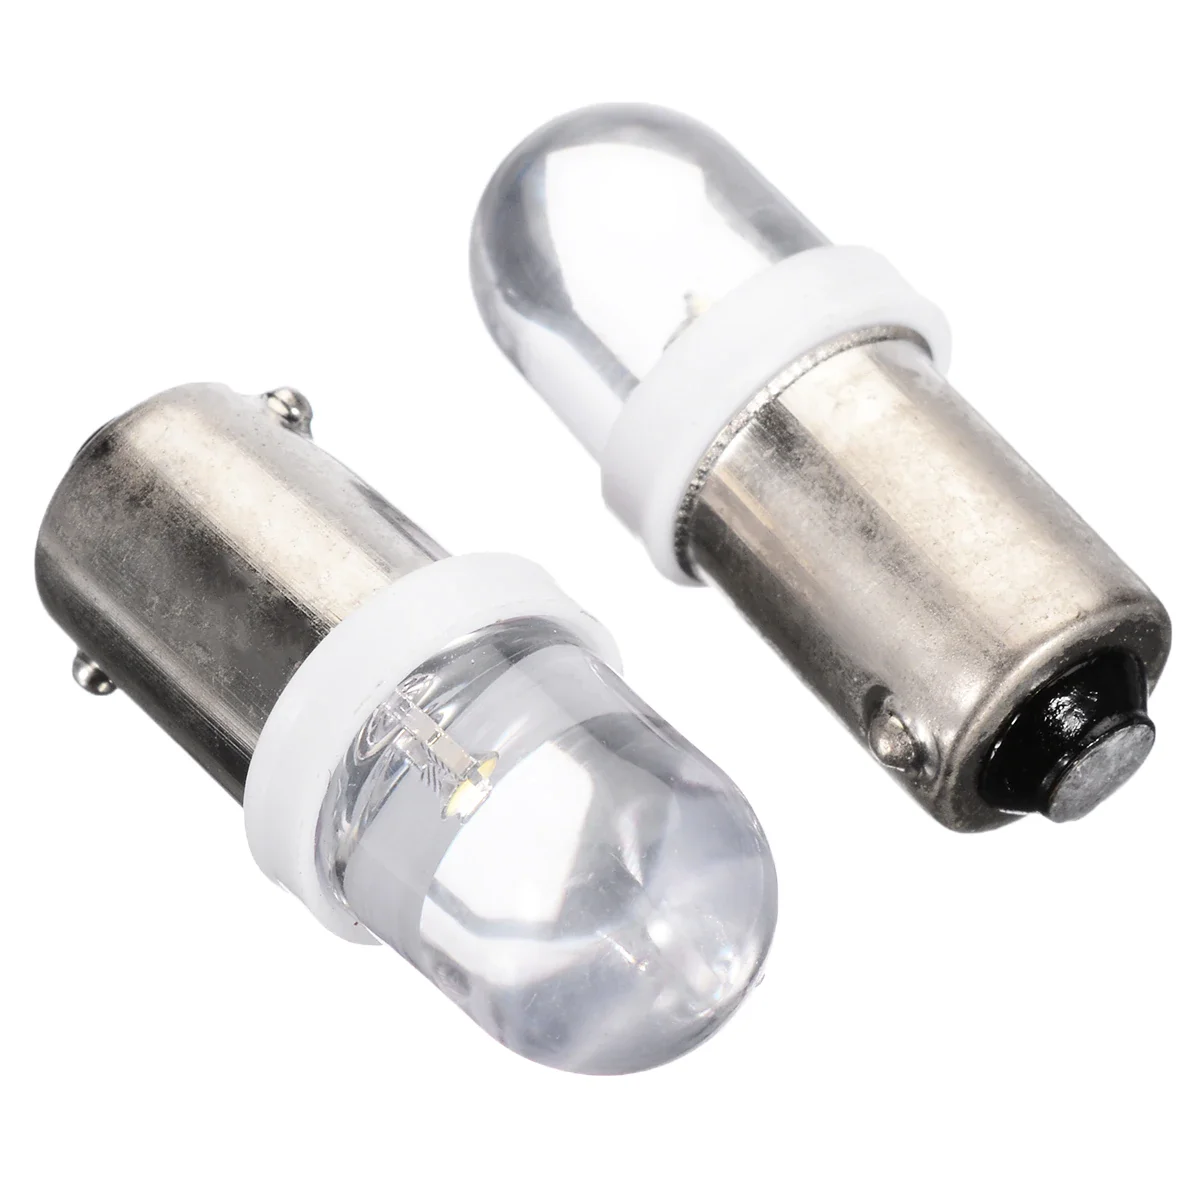 

20pcs T11 T4W BA9S H6W 1895 LED 12V Turn Signal Light Dashboard Bulb White Auto Car Styling Lighting Lamp Car Accessories